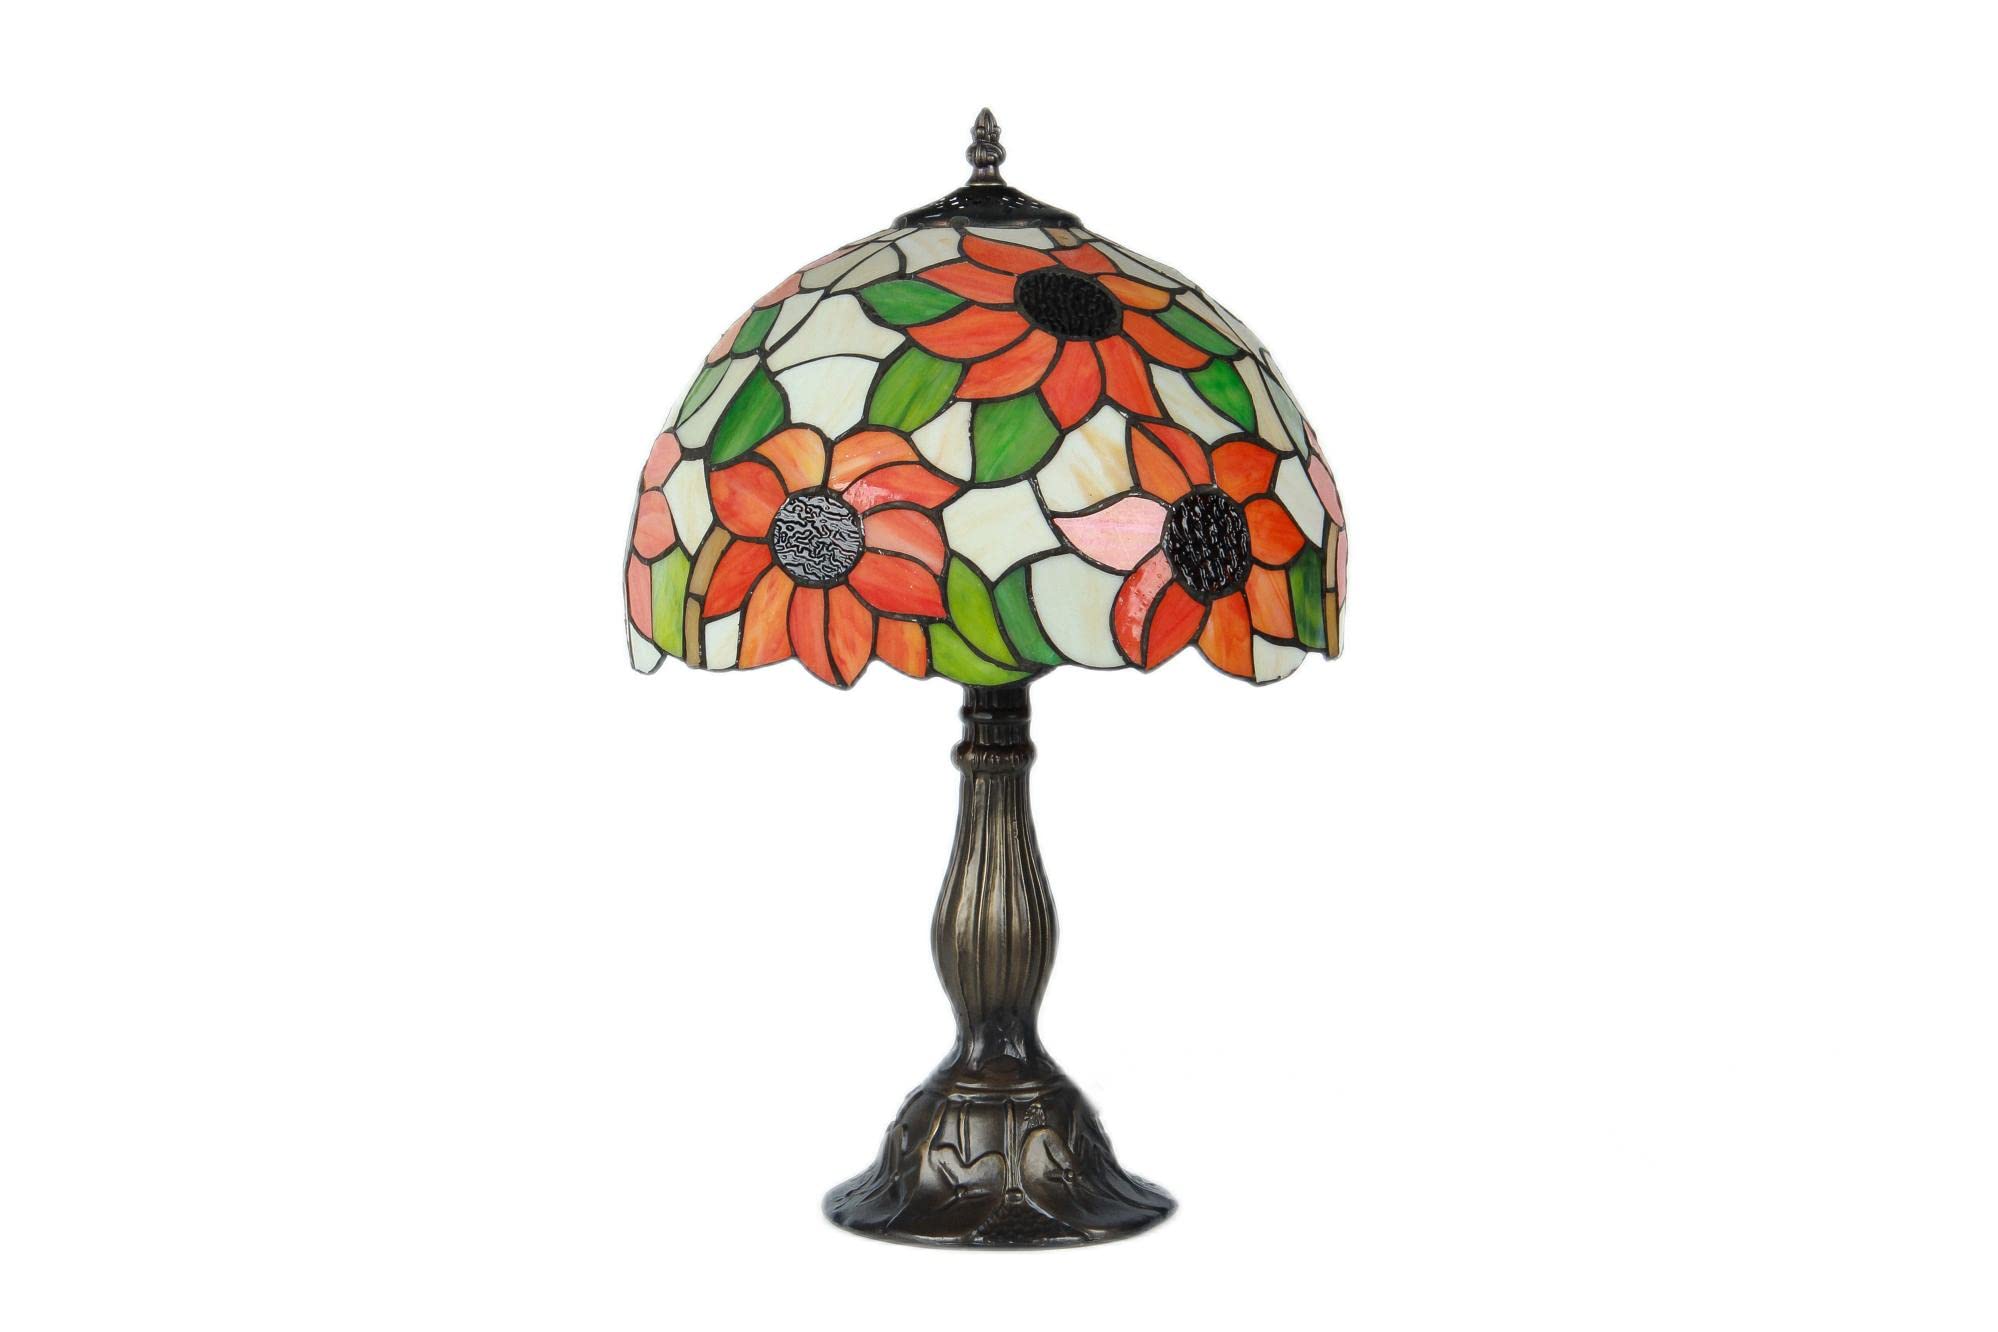 Mural Times Lighting Tiffany Lamp W12H18 Inch Sunflower Handmade Stained Glass Lampshade with Antique Brass Finish Metal Lamp Base Table Lamp for K...